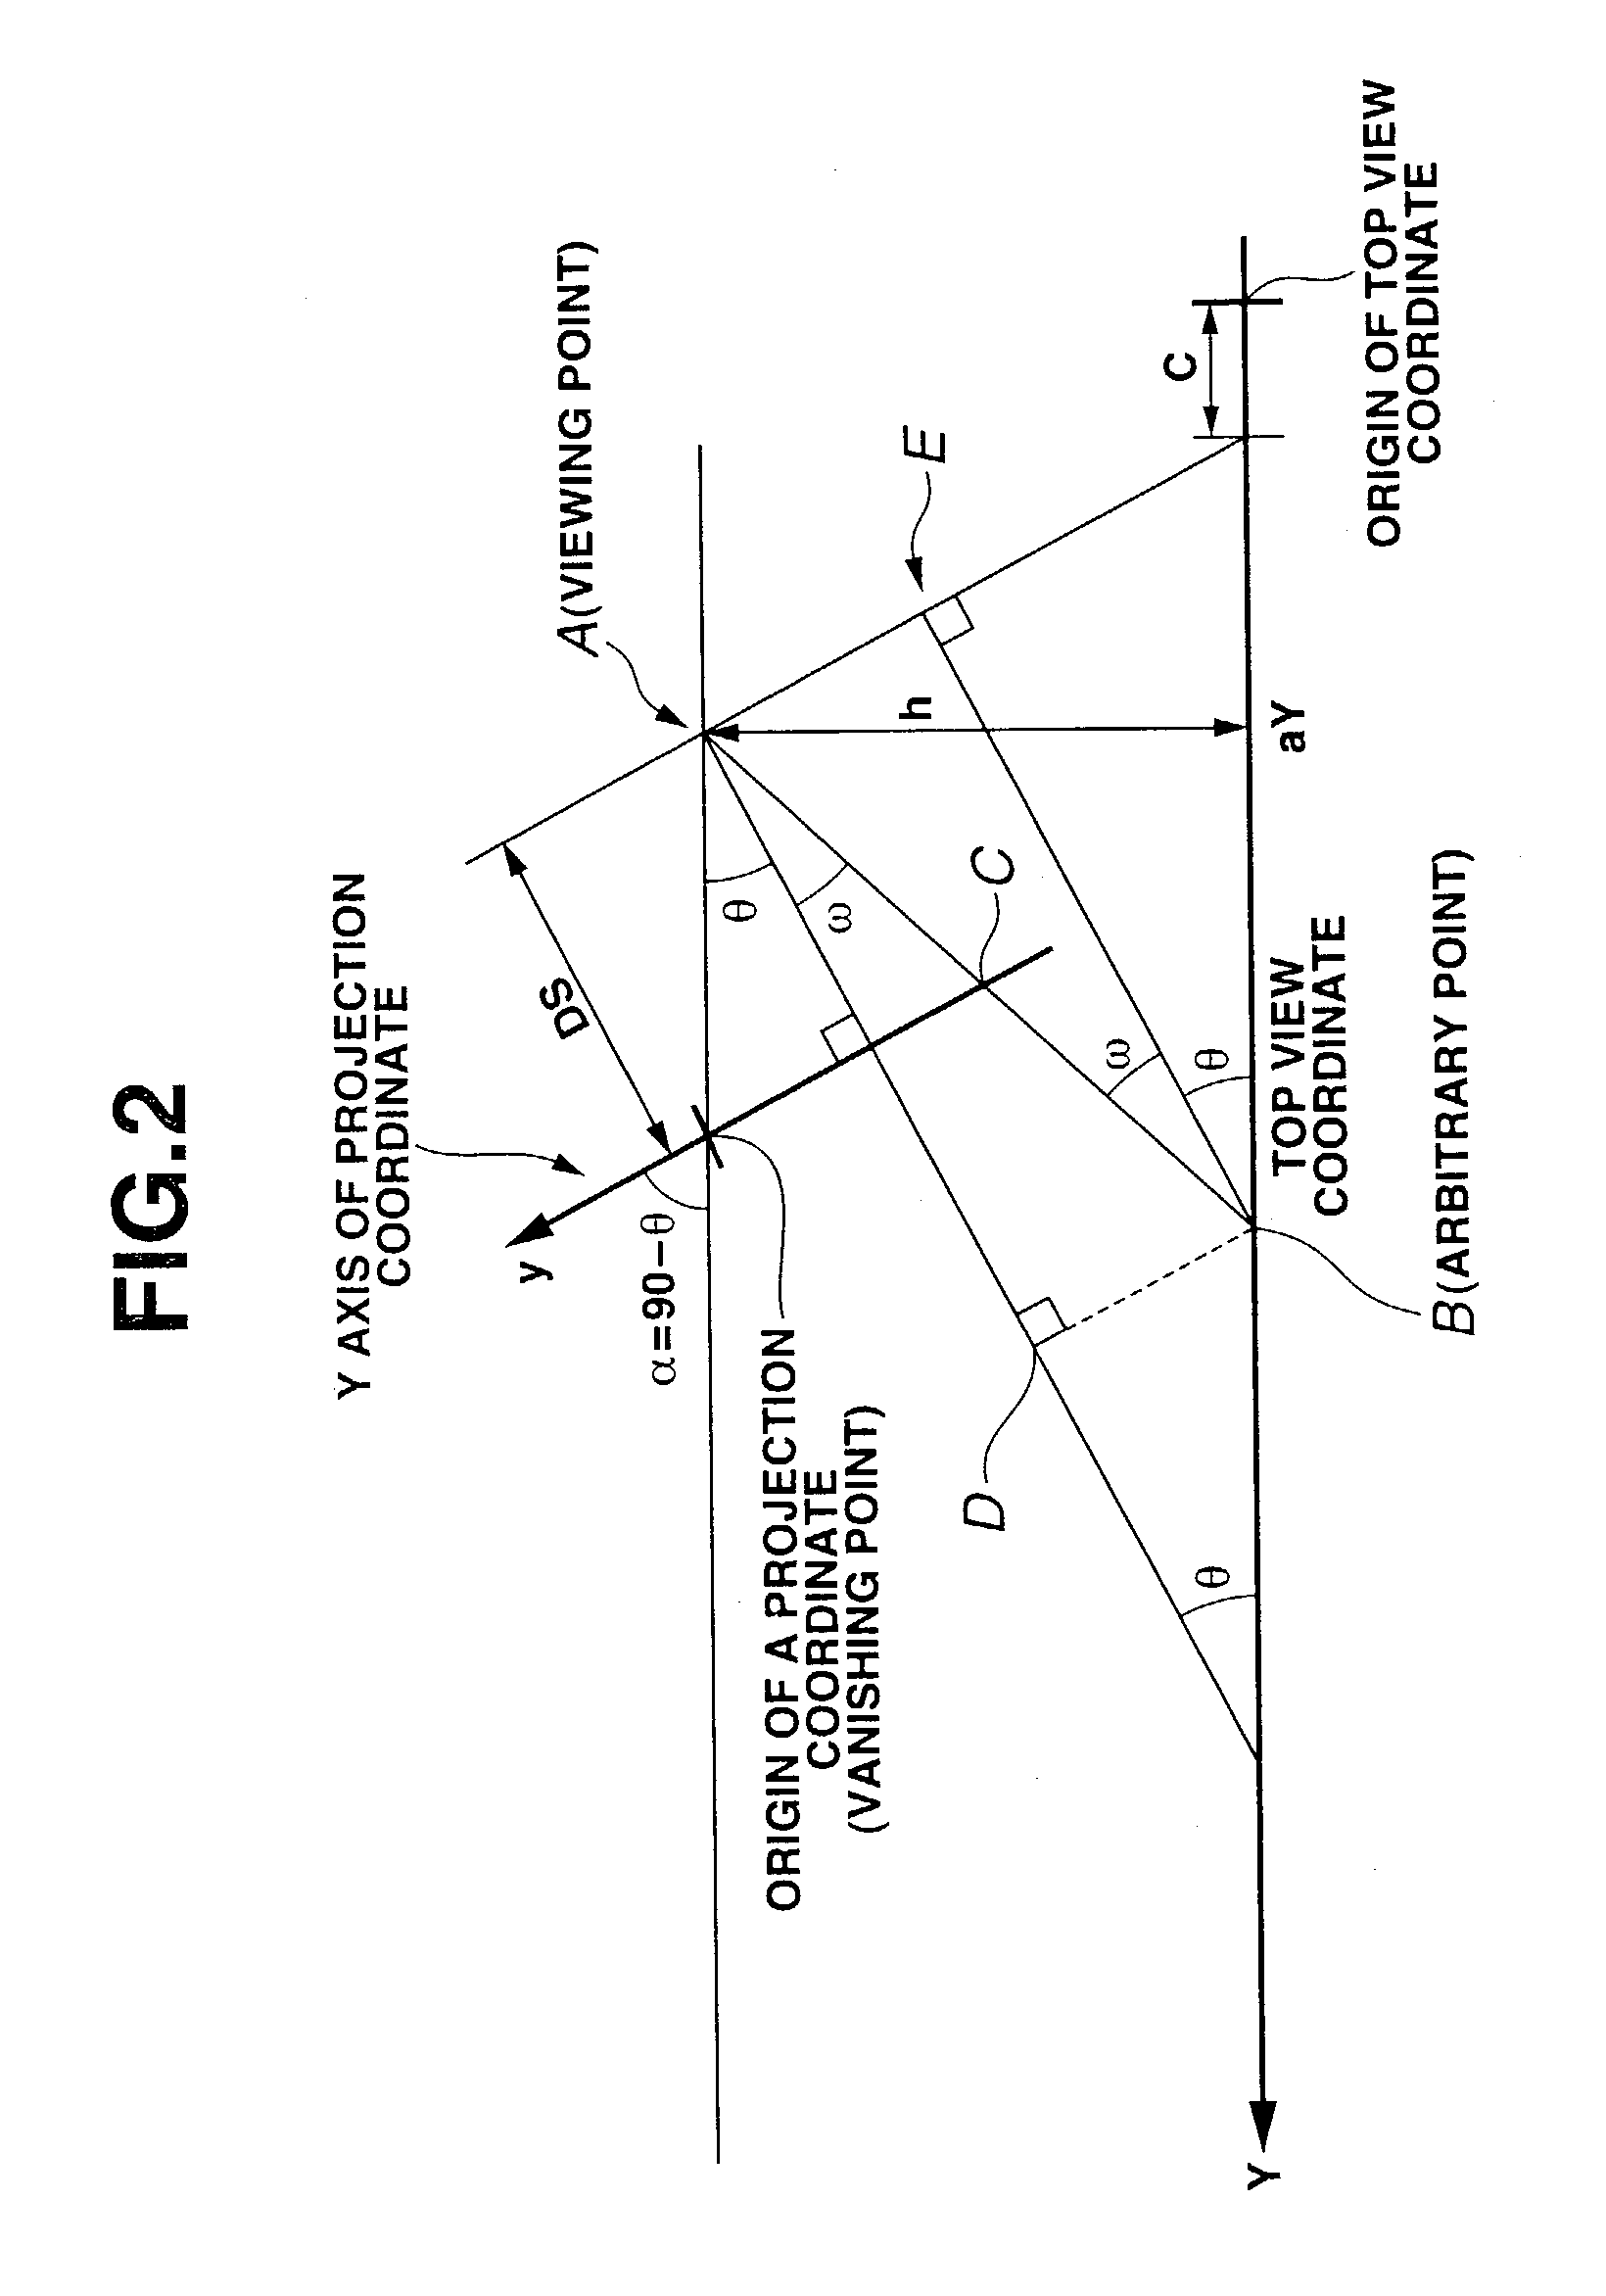 Image display apparatus, method, and program for automotive vehicle